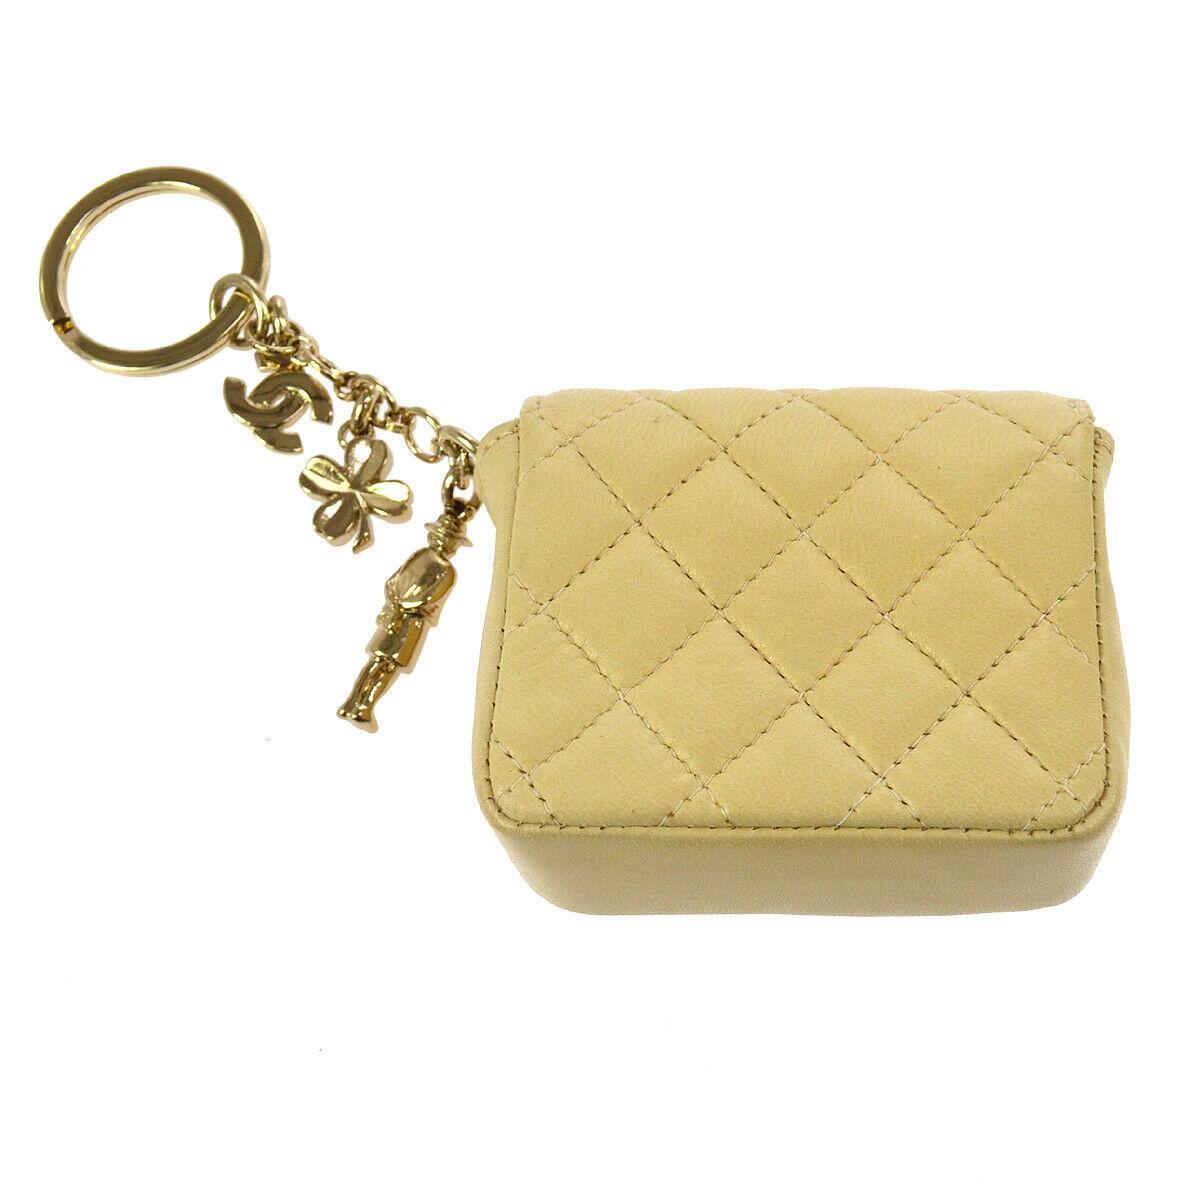 Chanel Leather Tan Nude Charm Belt Micro Mini Chain Flap Bag

Leather
Gold tone hardware
Leather lining
Date code present
Made in France
Chain length 3.25